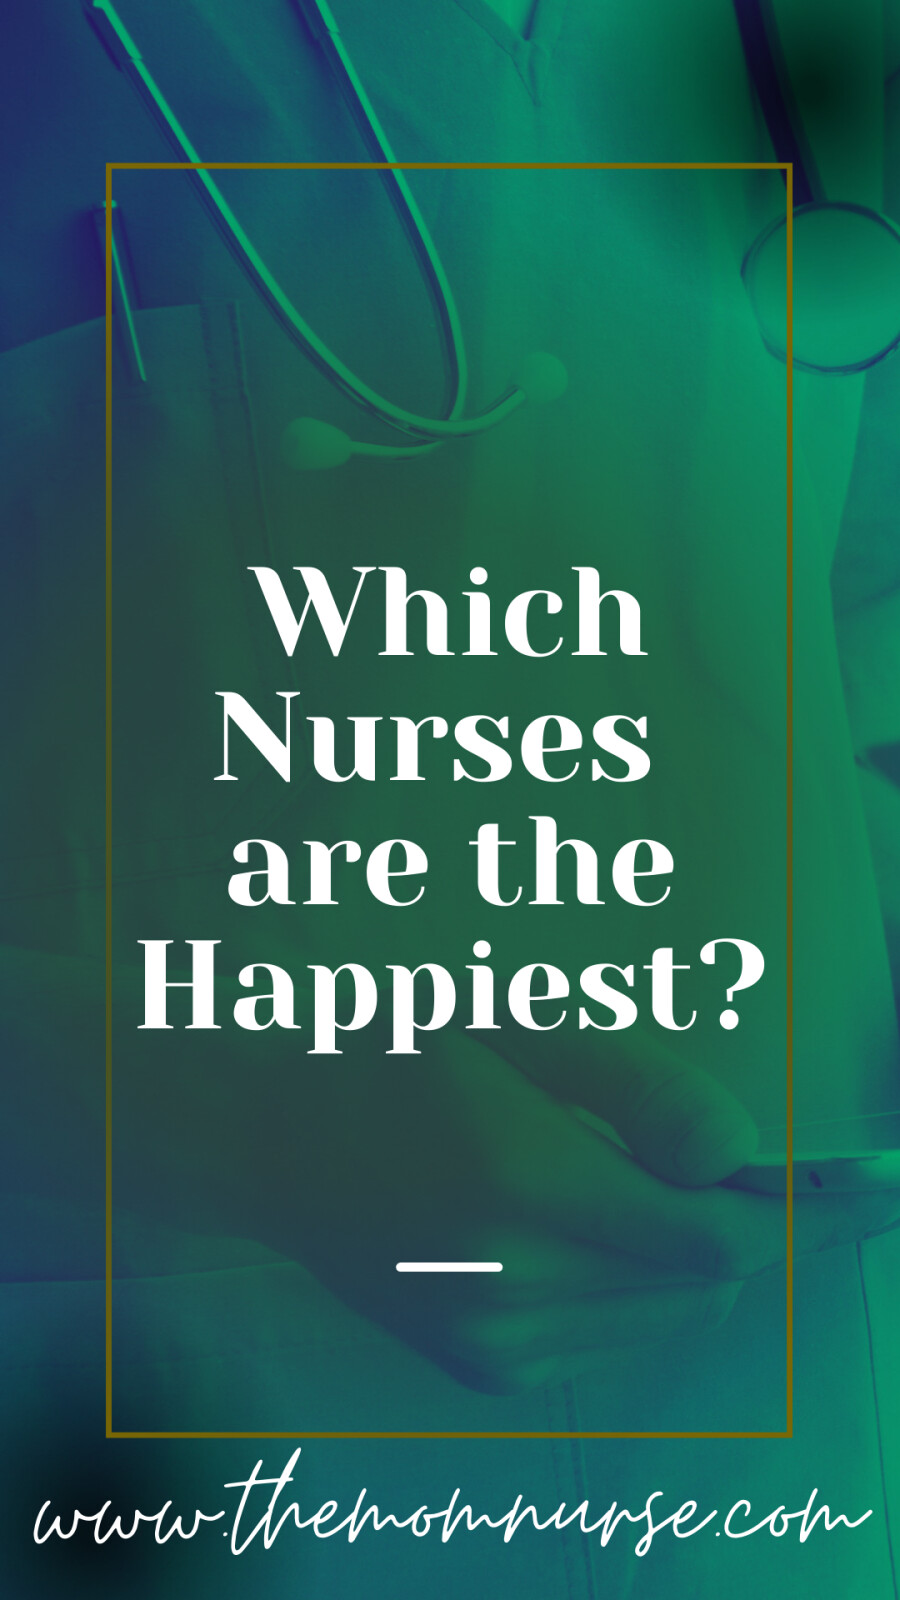 Which Nurses are the Happiest?